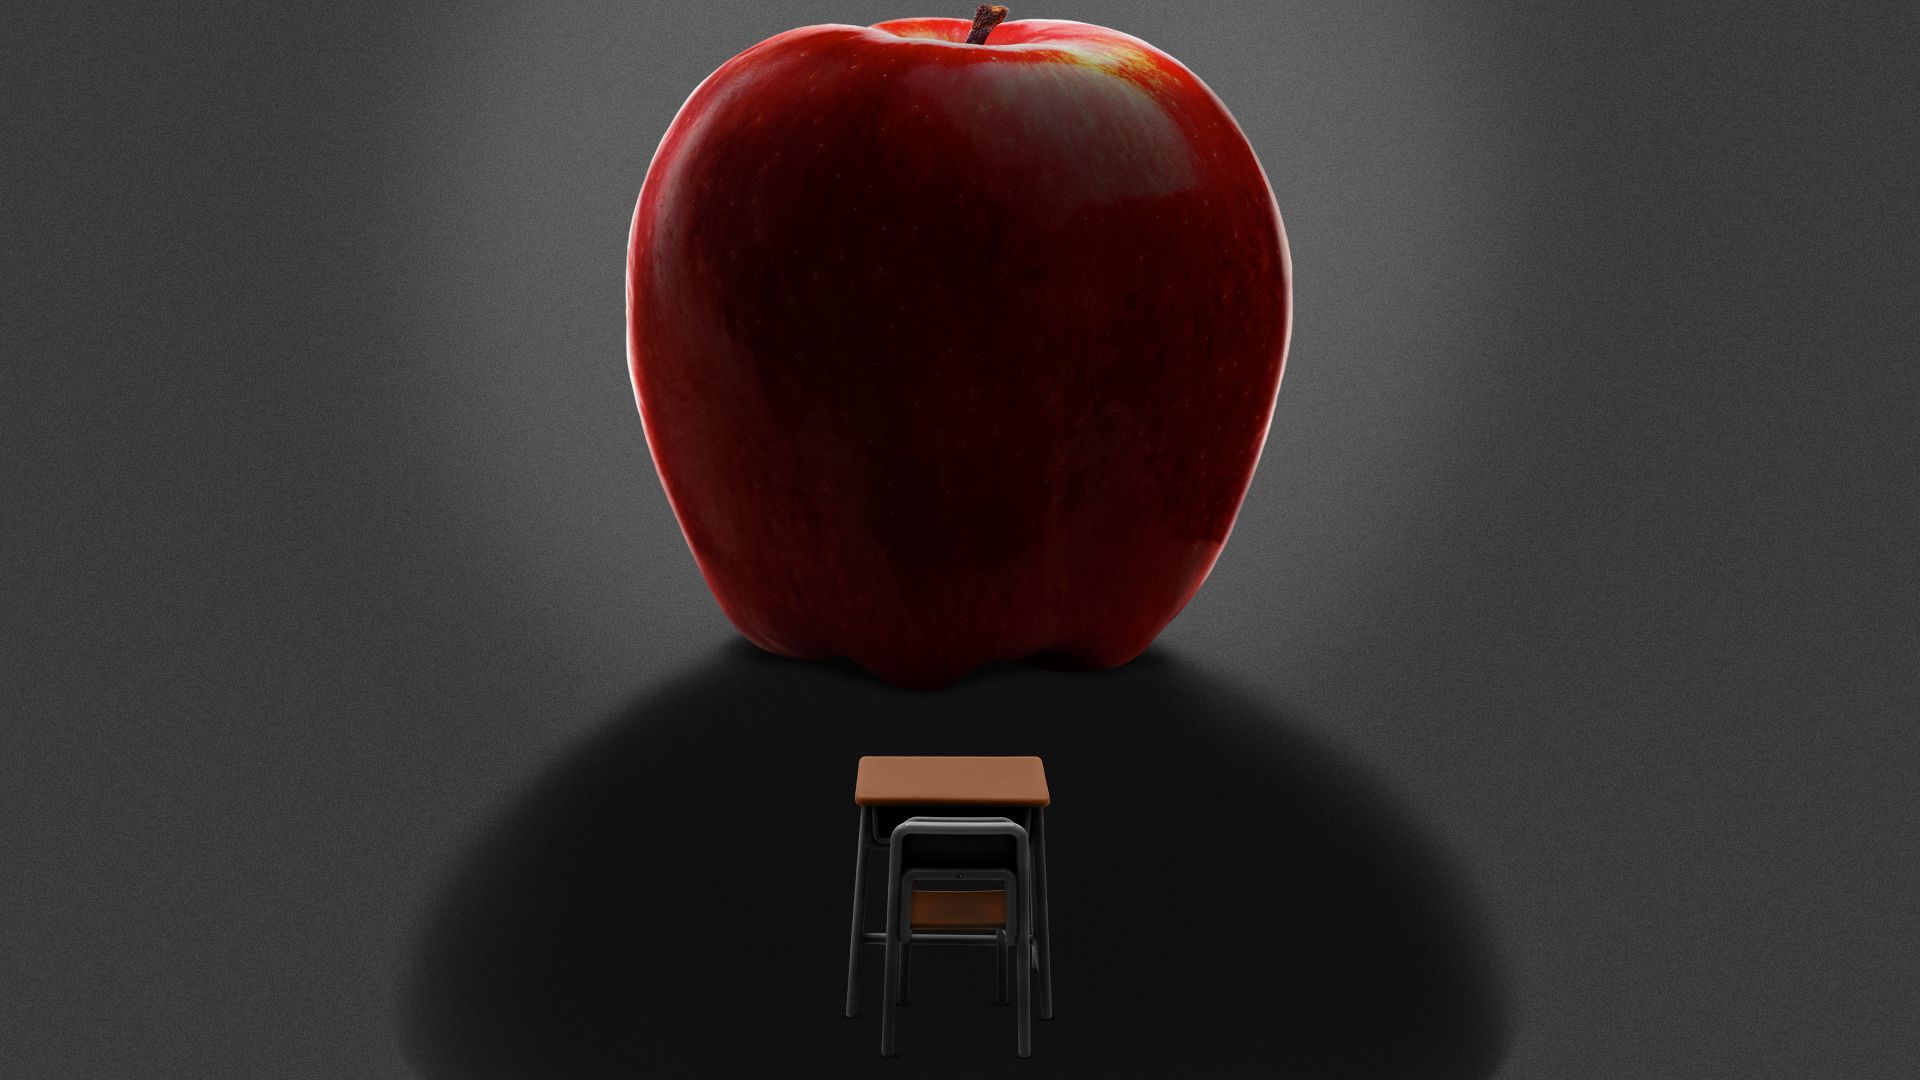 Illustration of a large apple looming over a school desk.